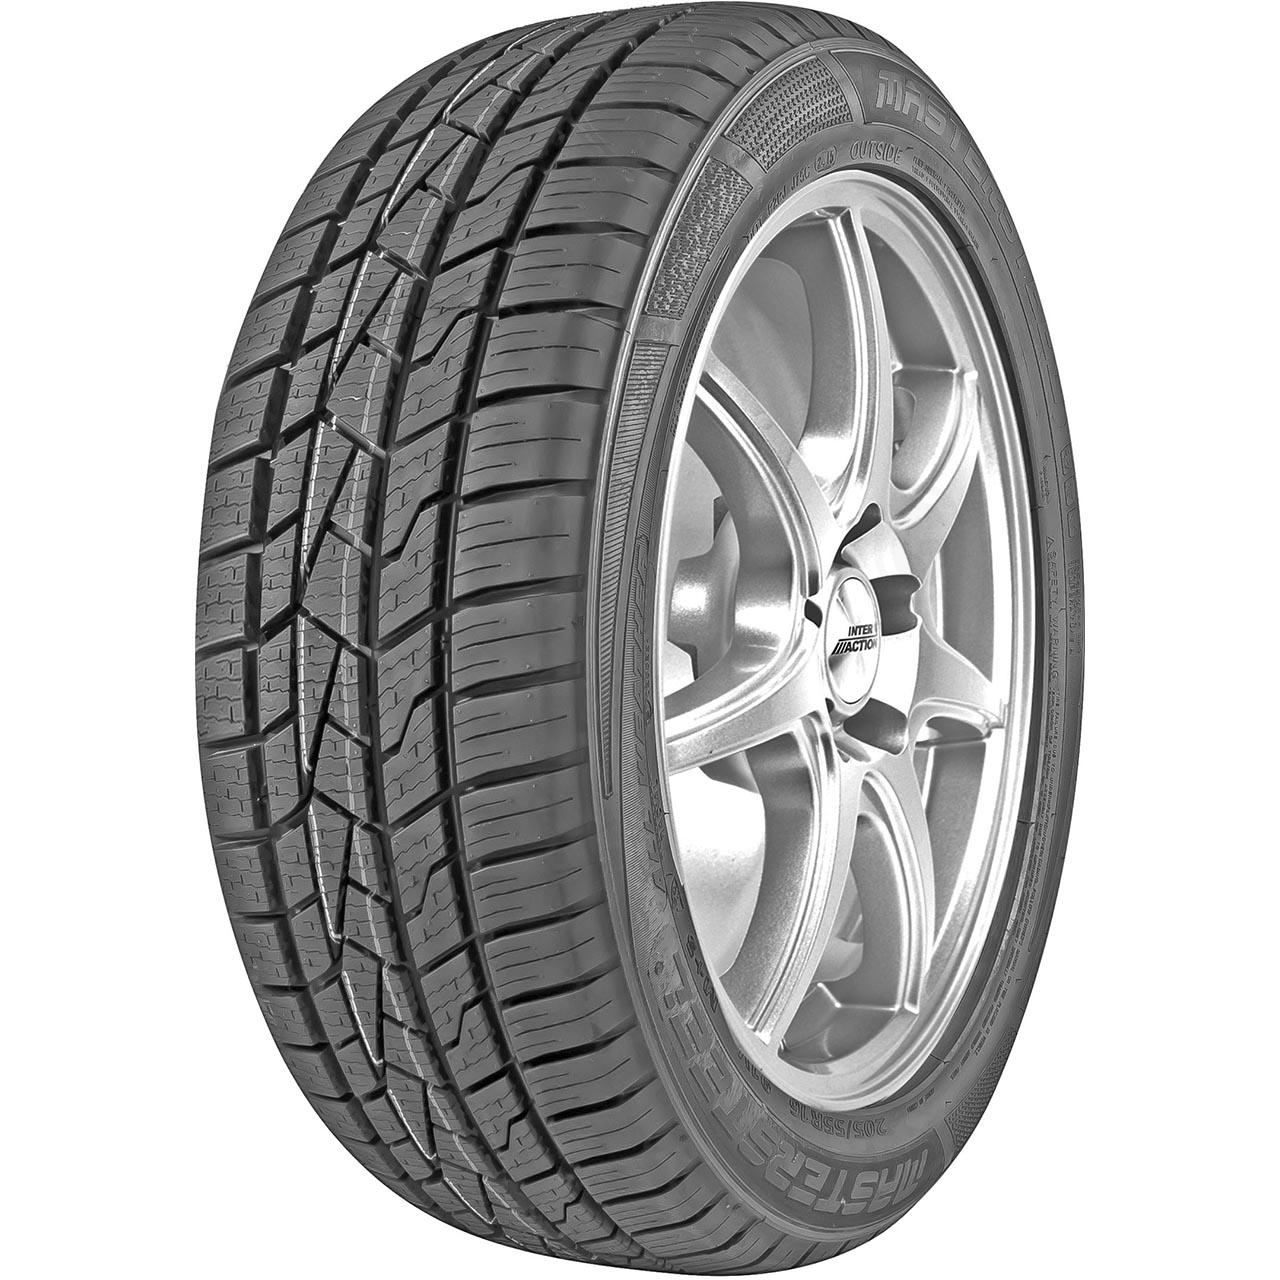 Mastersteel ALL Weather 155/65R14 75T